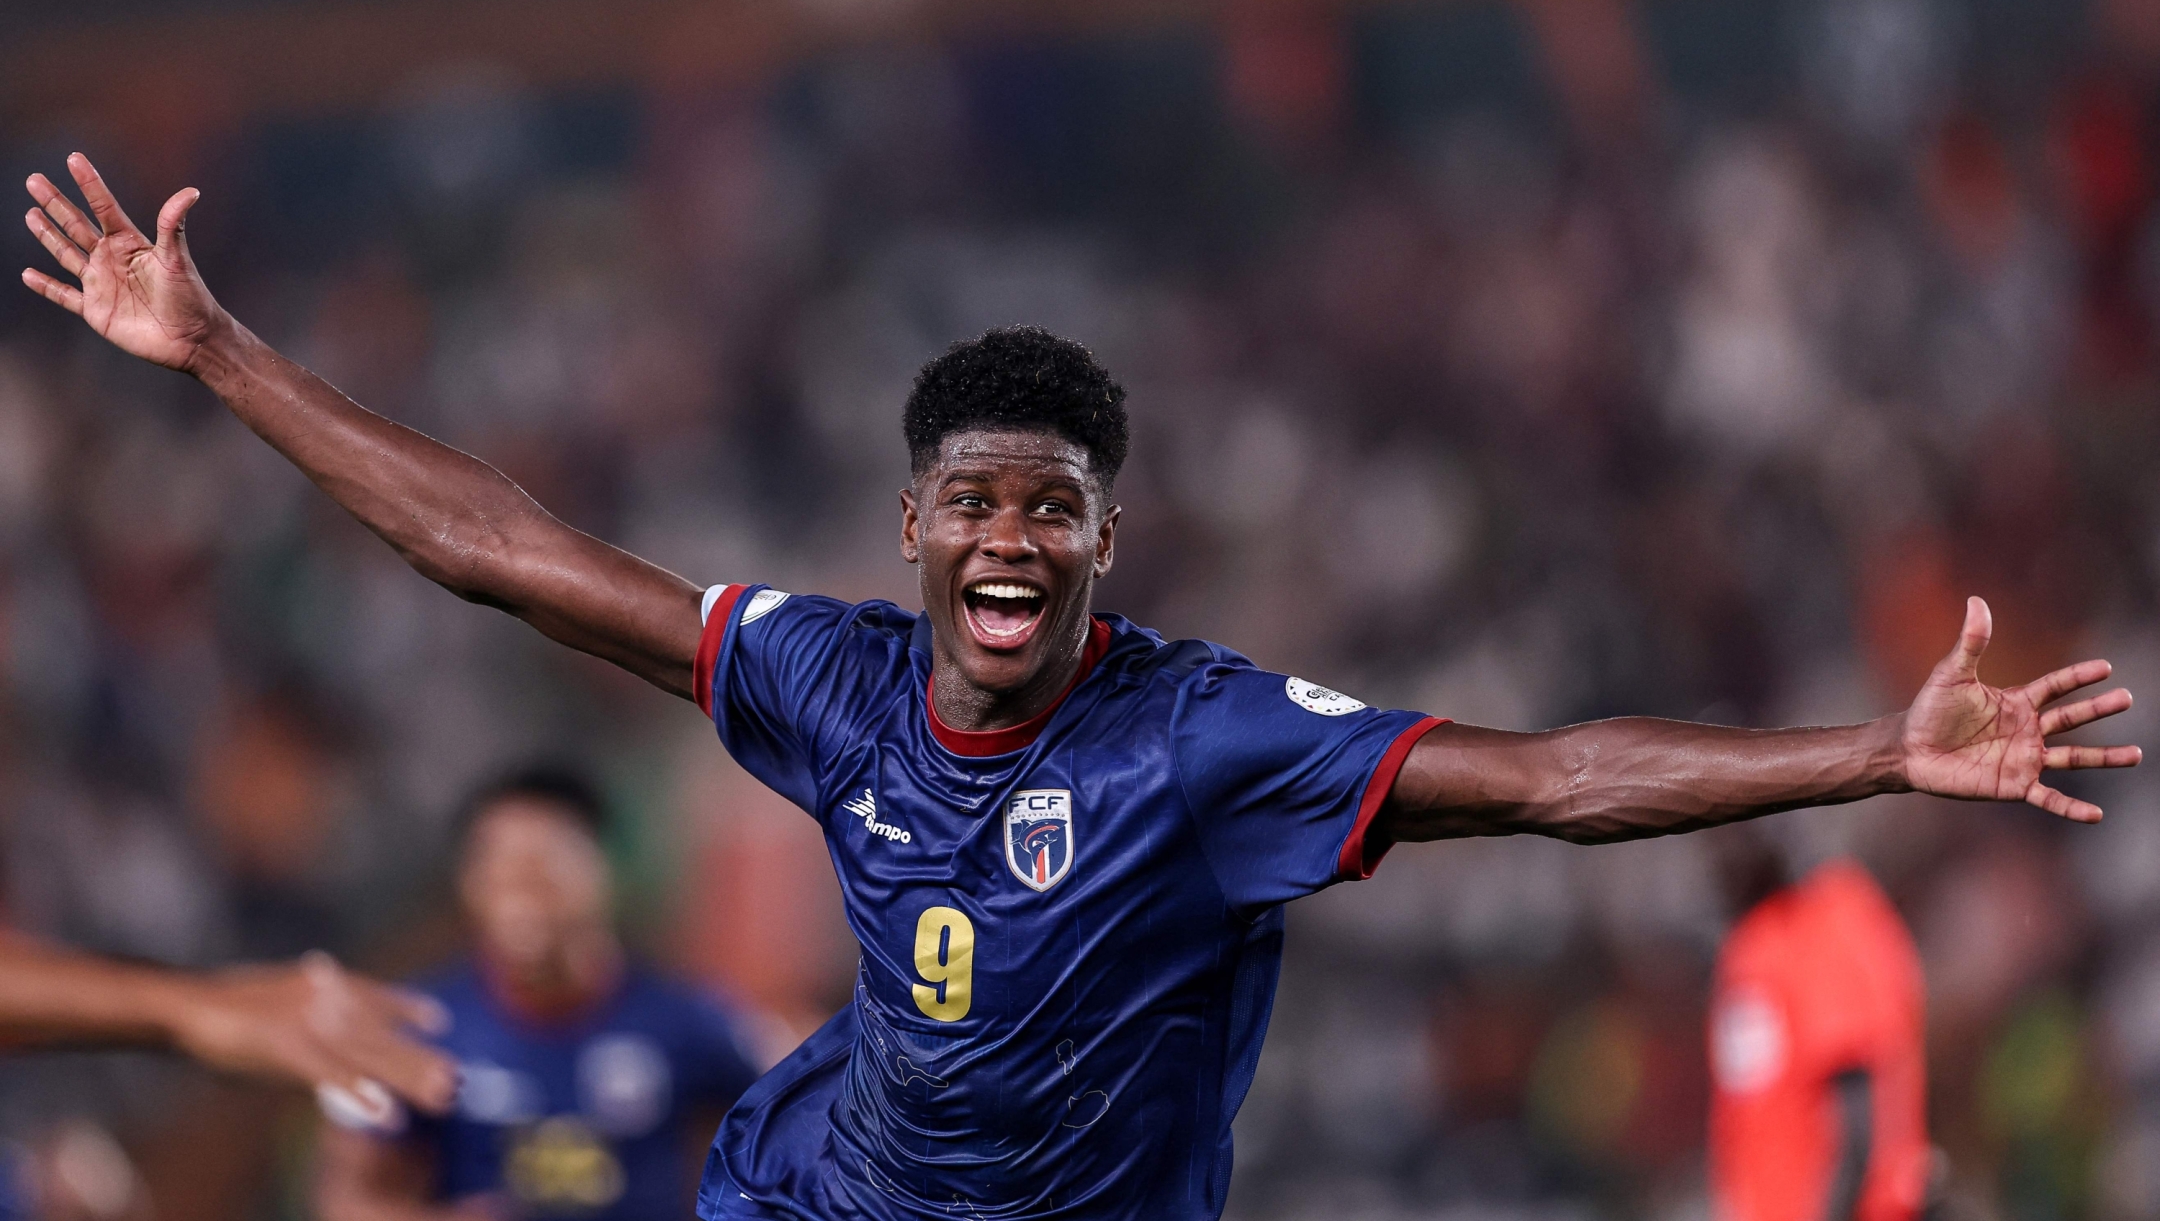 TOPSHOT - Cape Verde's forward #9 Benchimol celebrates scoring his team's first goal during the Africa Cup of Nations (CAN) 2024 group B football match between Cape Verde and Egypt at the Felix Houphouet-Boigny Stadium in Abidjan on January 22, 2024. (Photo by FRANCK FIFE / AFP)